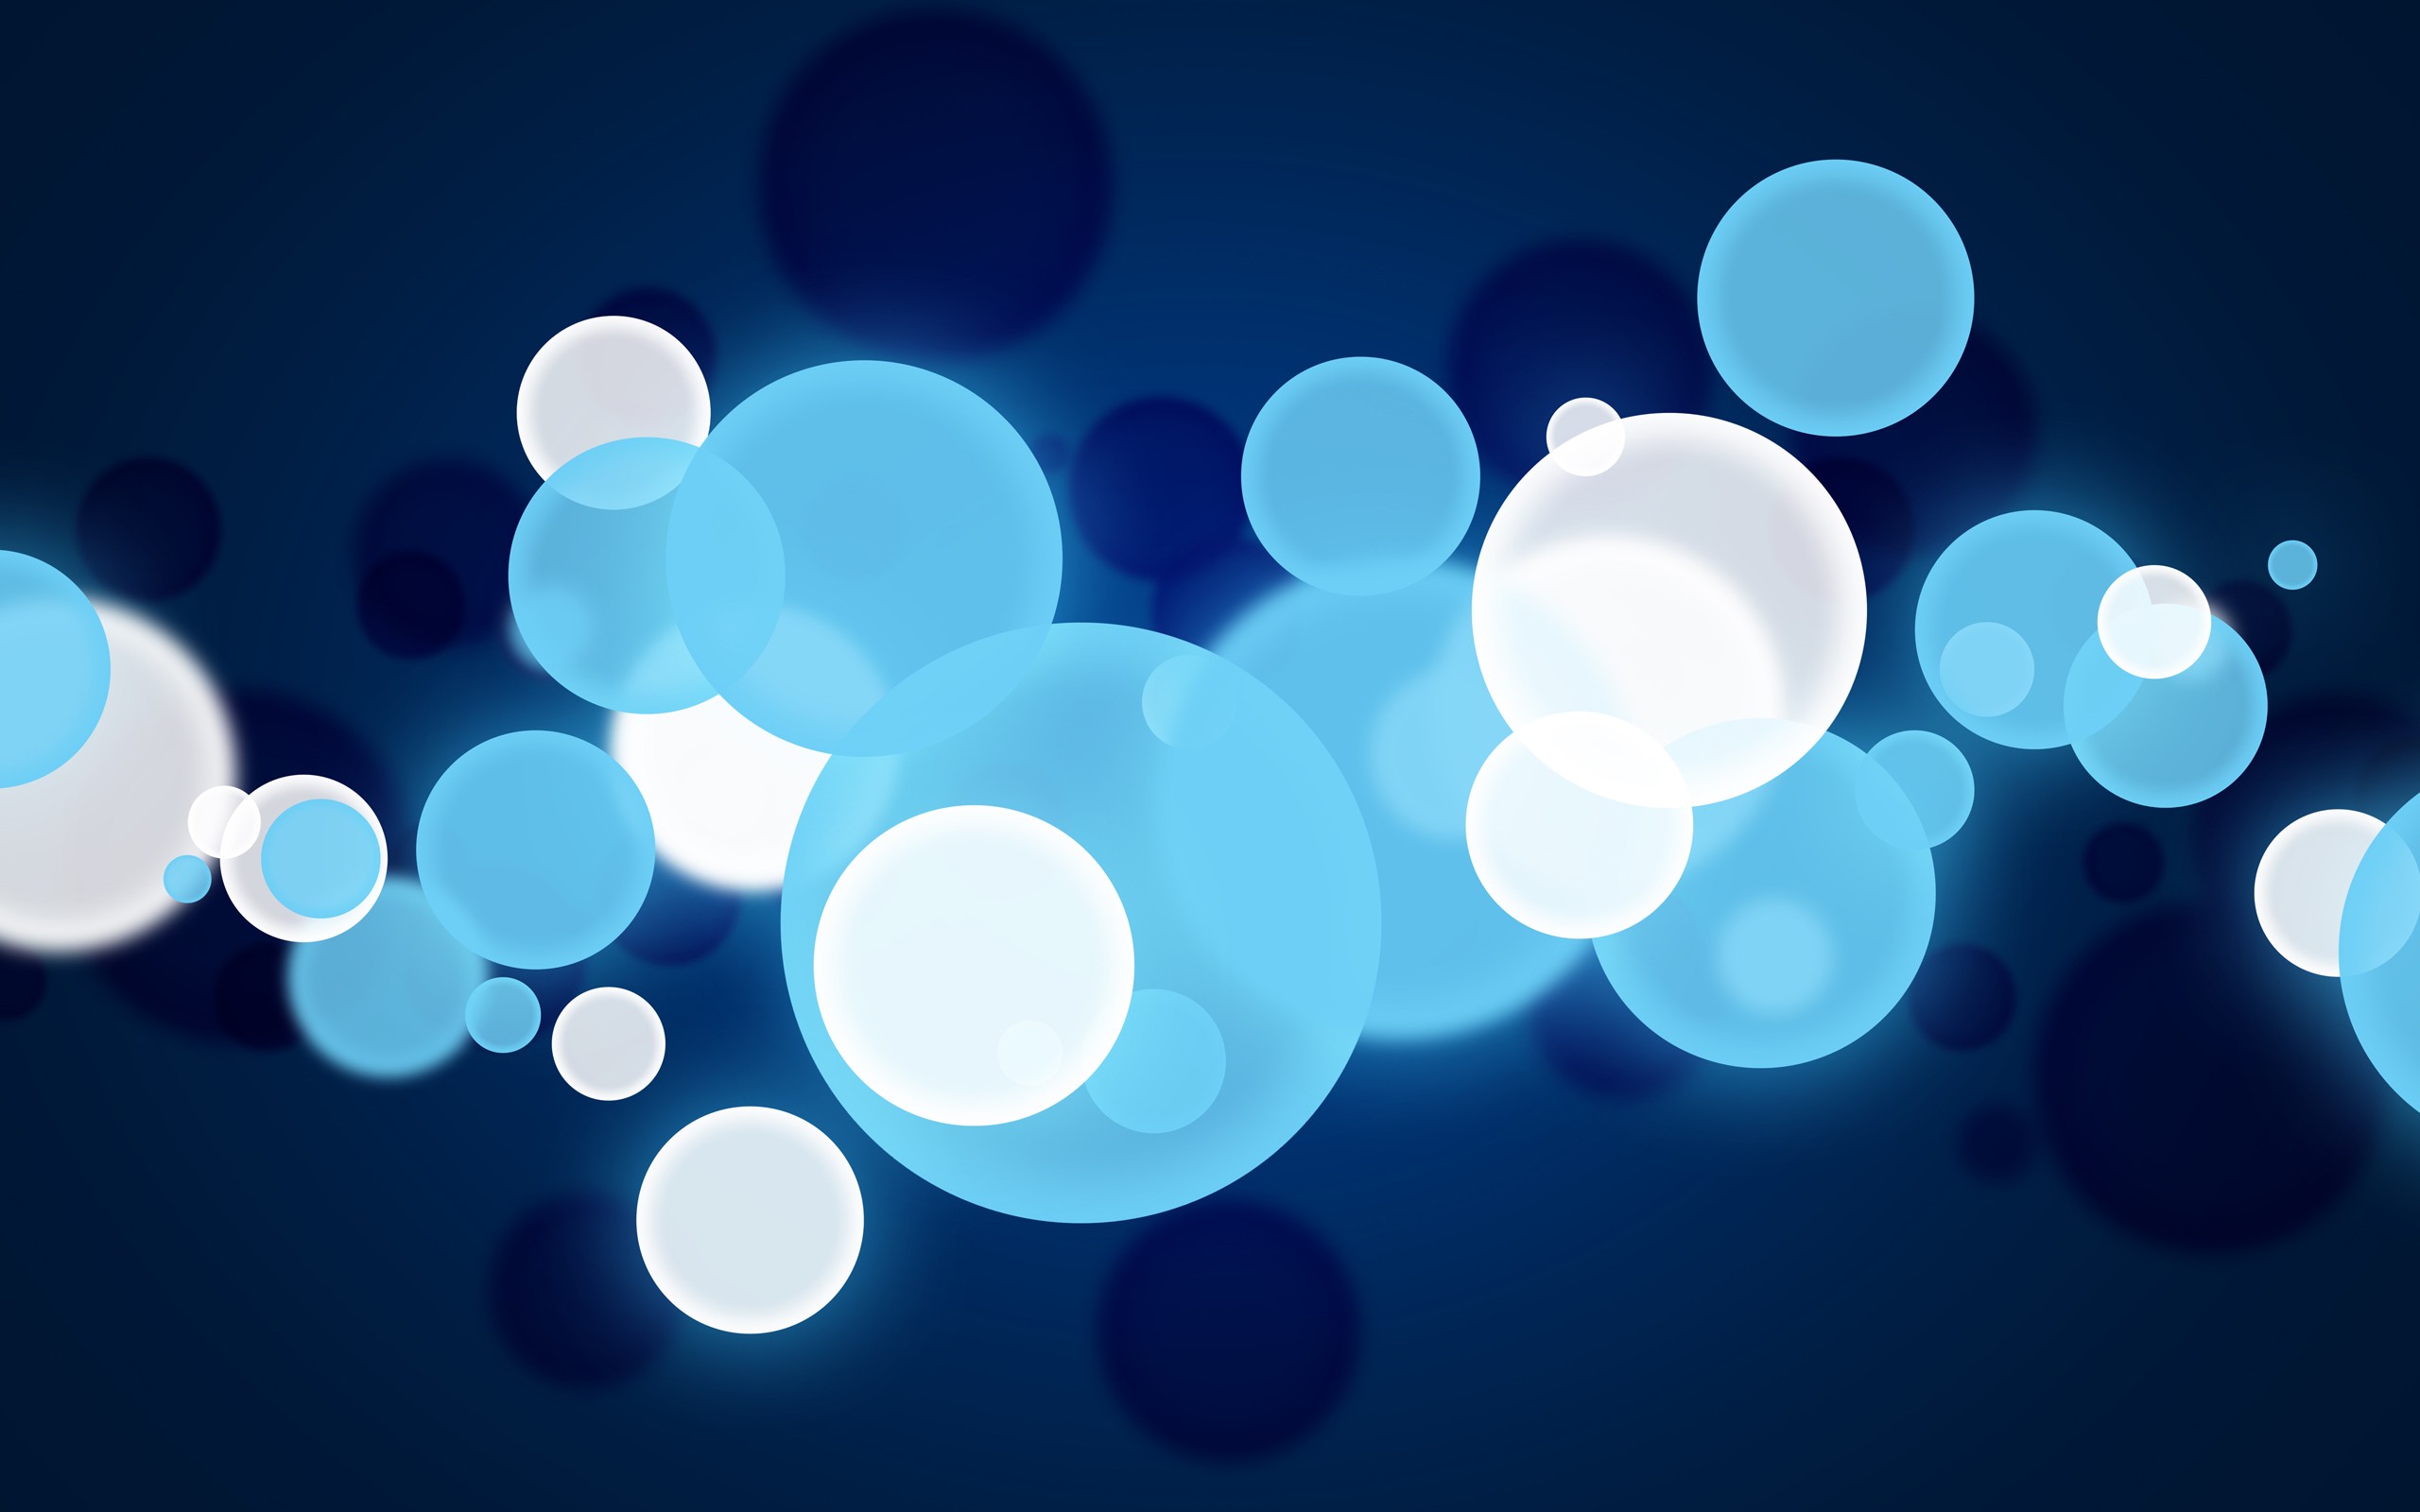 dots, Abstract, Sphere, Blue Wallpaper